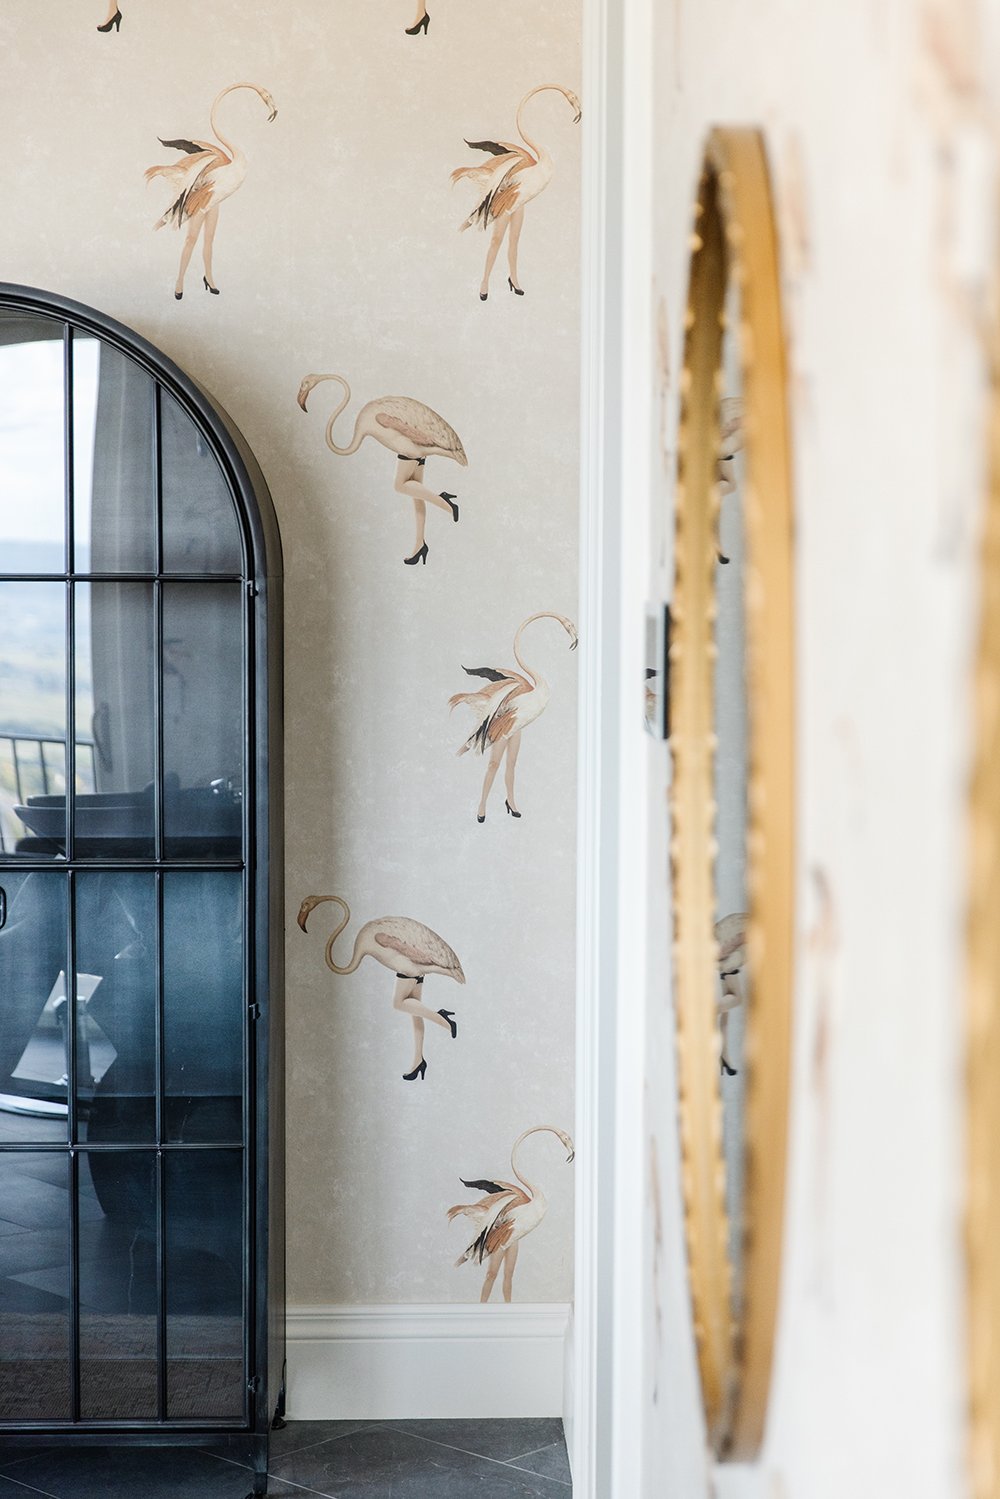  Liz Powel uses wallpaper to bring personality into a room without much effort. Flamingo wallpaper European style gold mirror Liz Powell designs girls bedroom #europeanwallpaper #flamingos #girlsbedroom #Loganutahinteriordesign 